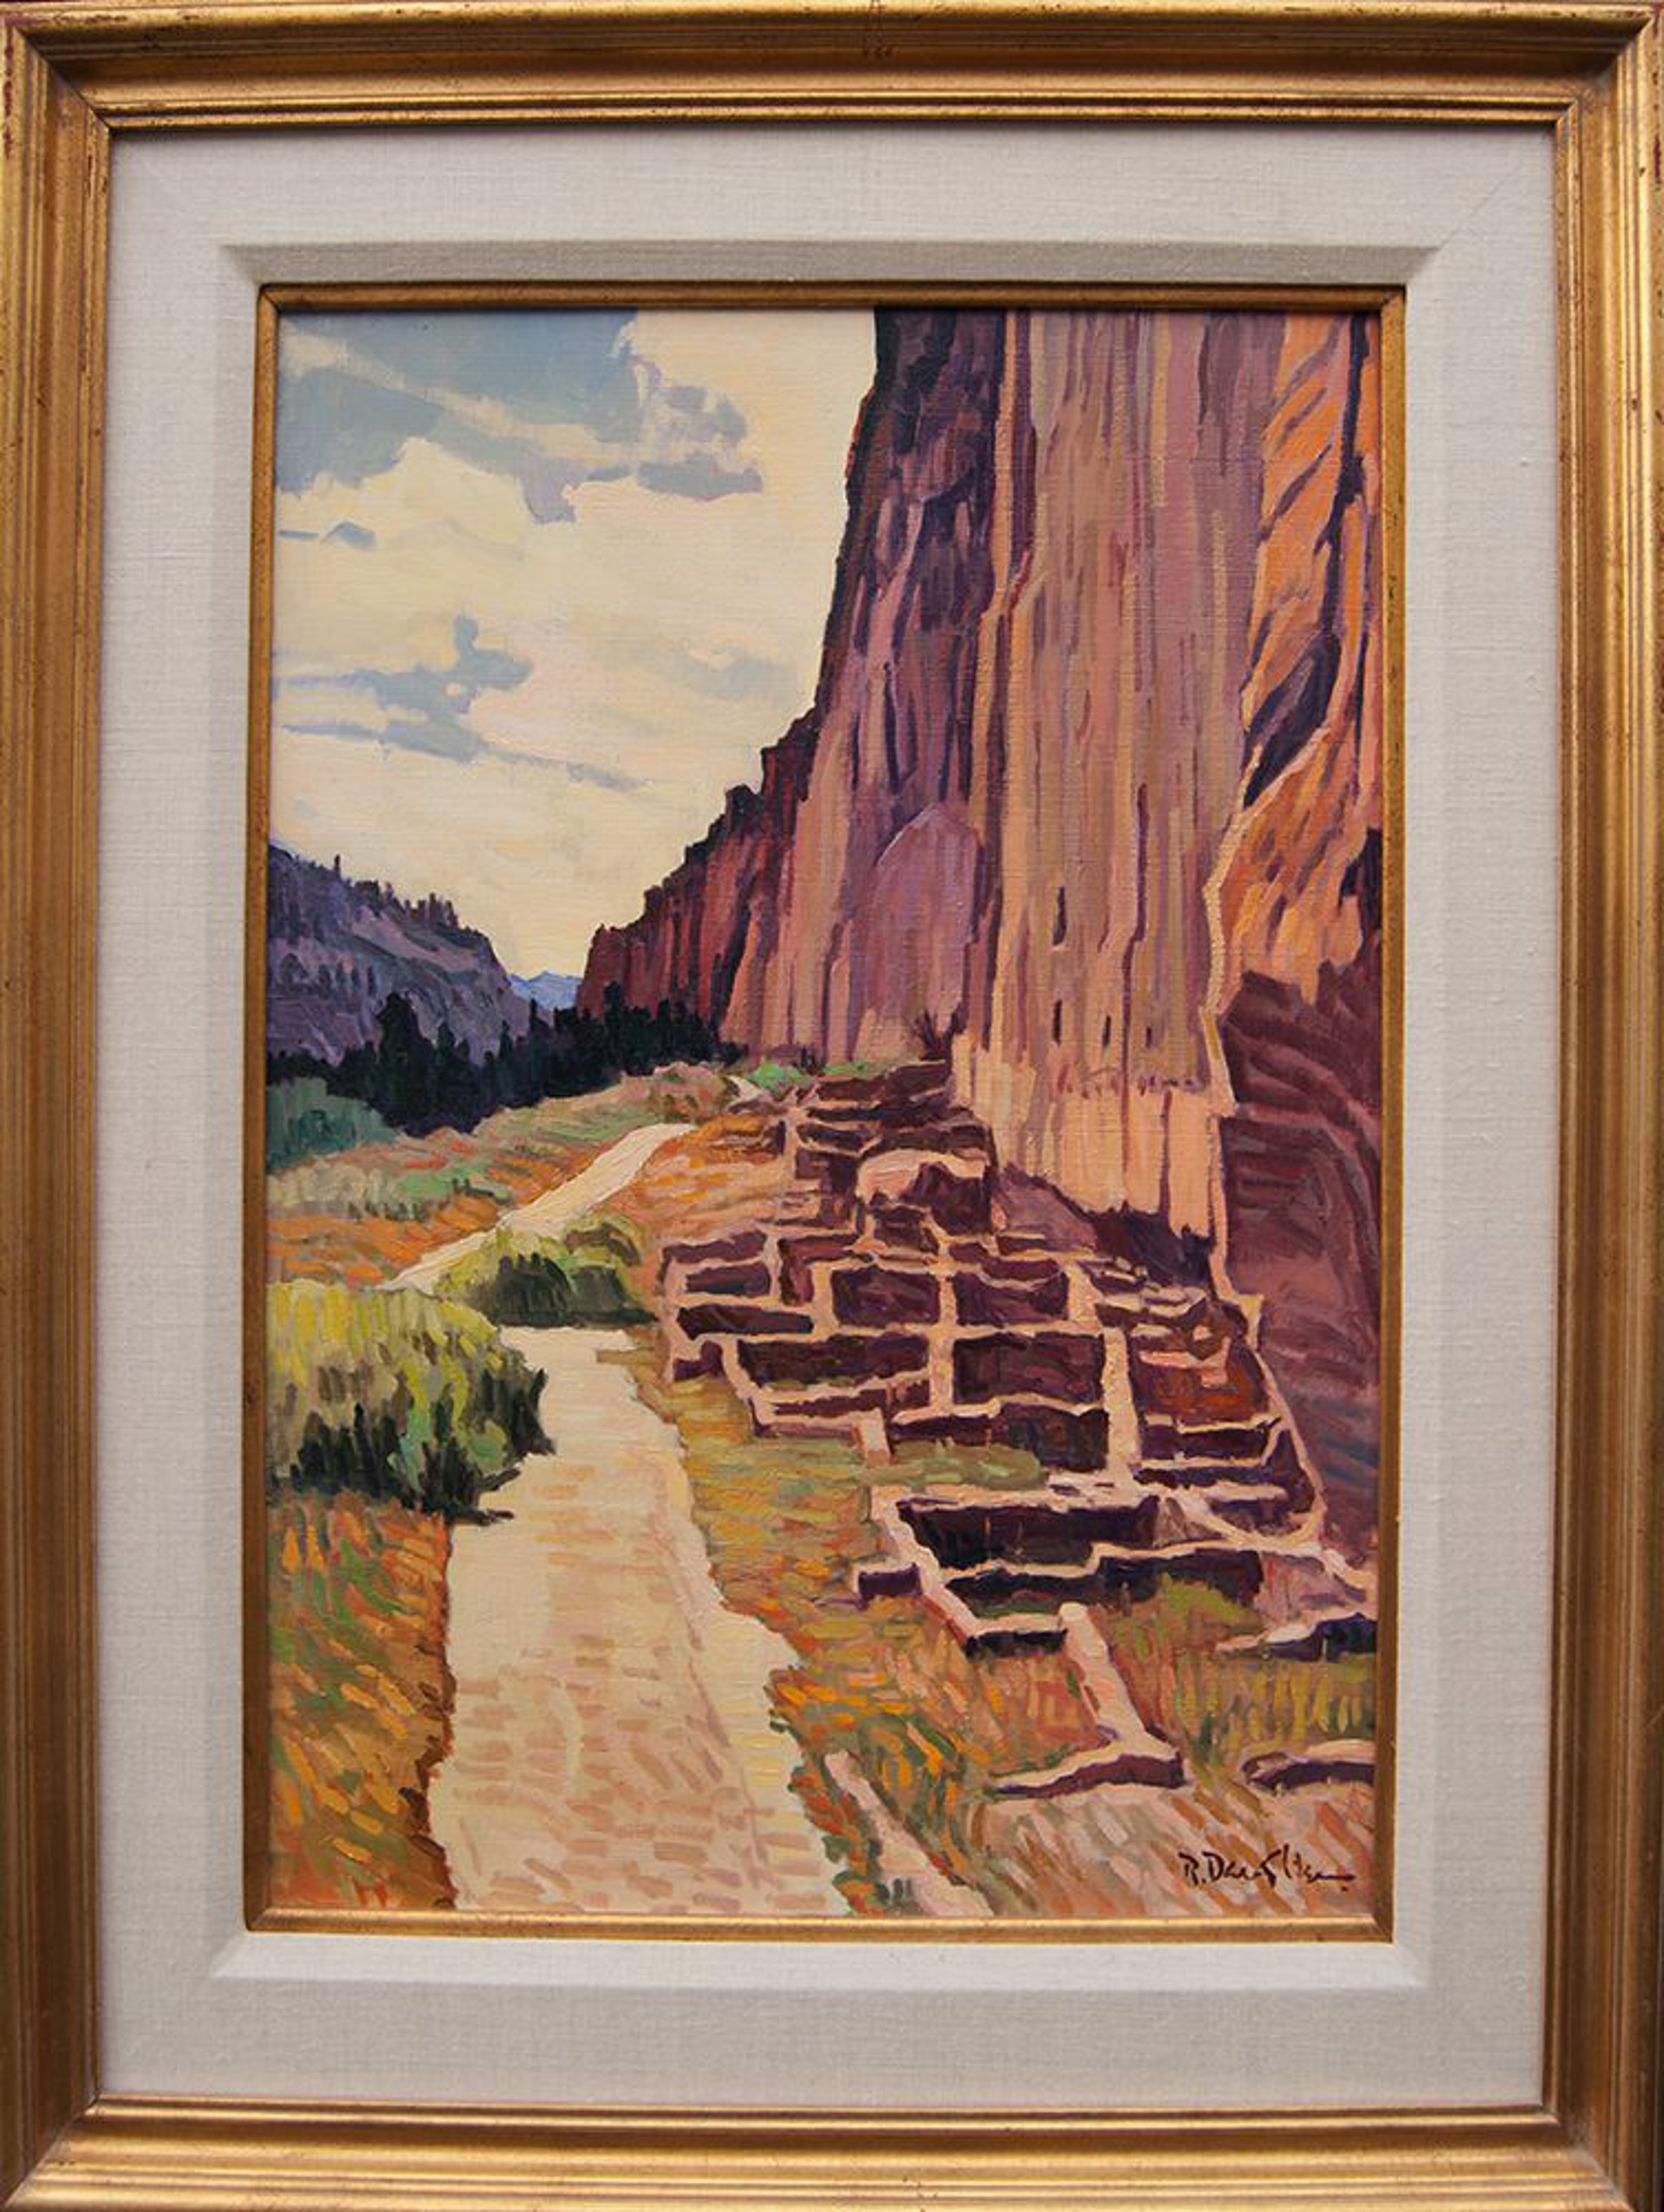 Long House Path, Bandalier by Robert Daughters (1929-2013)